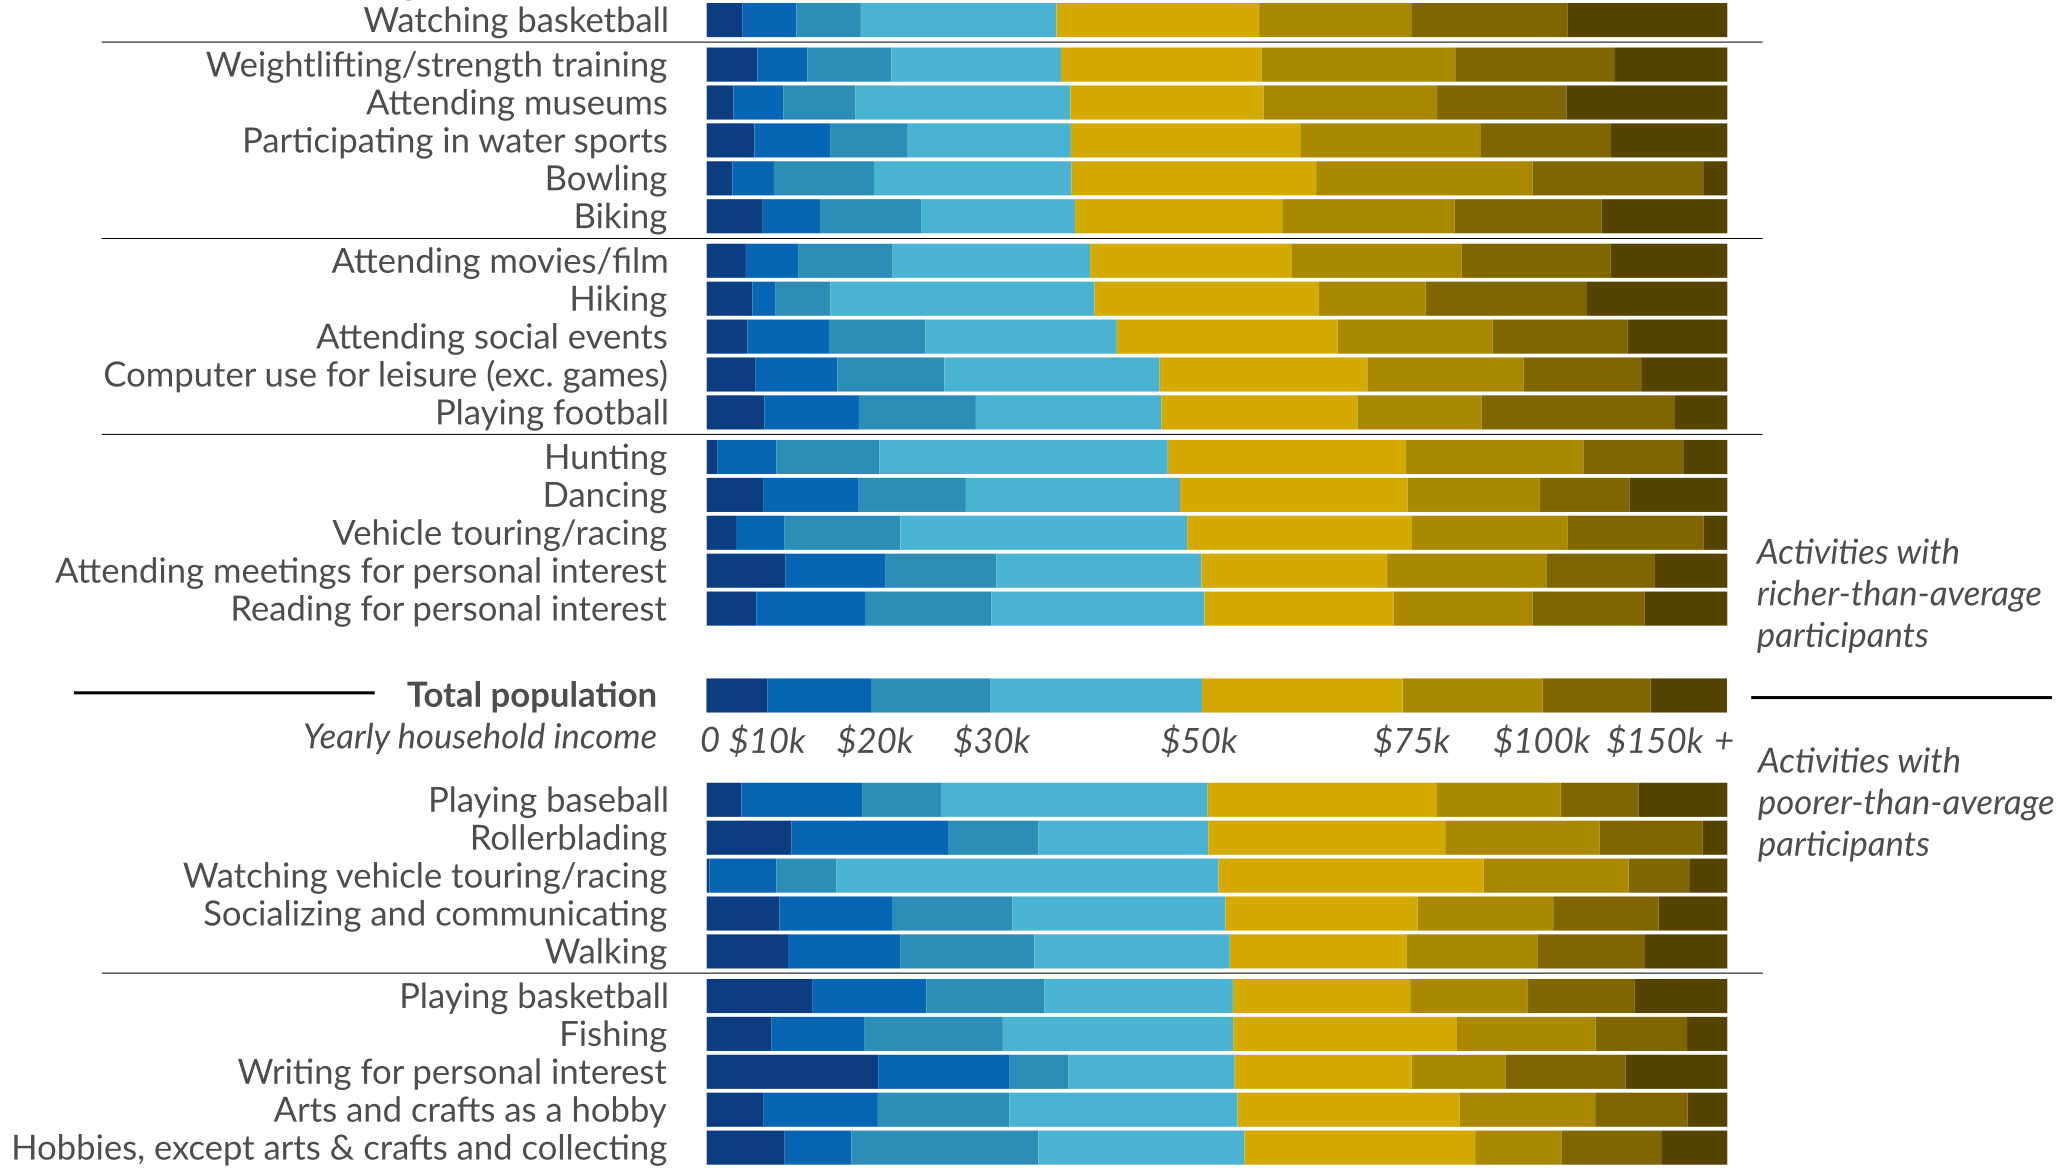 Here’s How Americans Spend Their Time, Sorted by Income